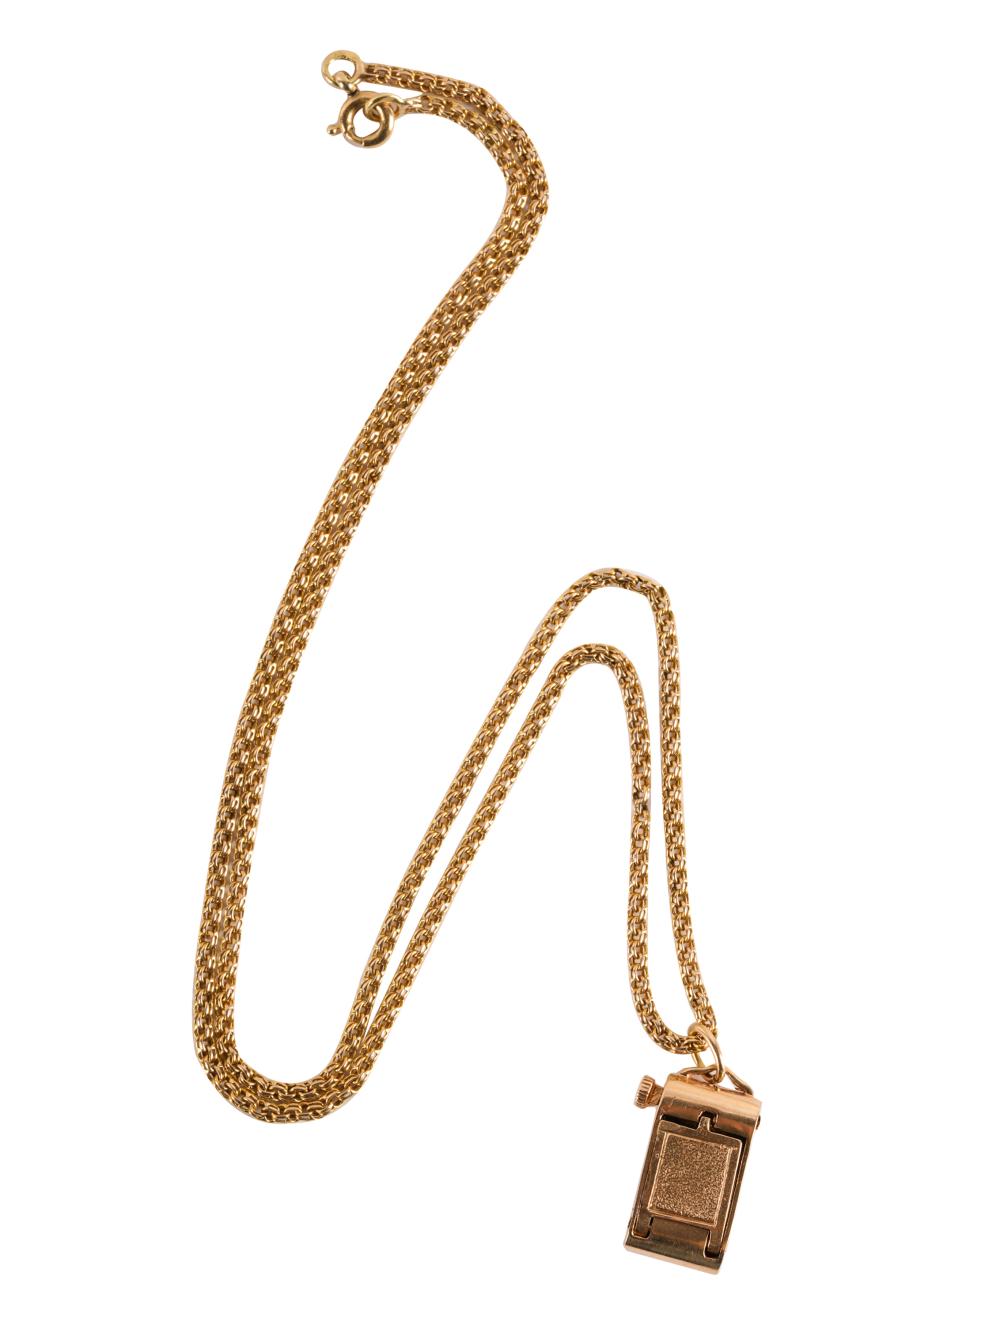 YELLOW GOLD CAMERA CHARM NECKLACEcomprising 334c9f